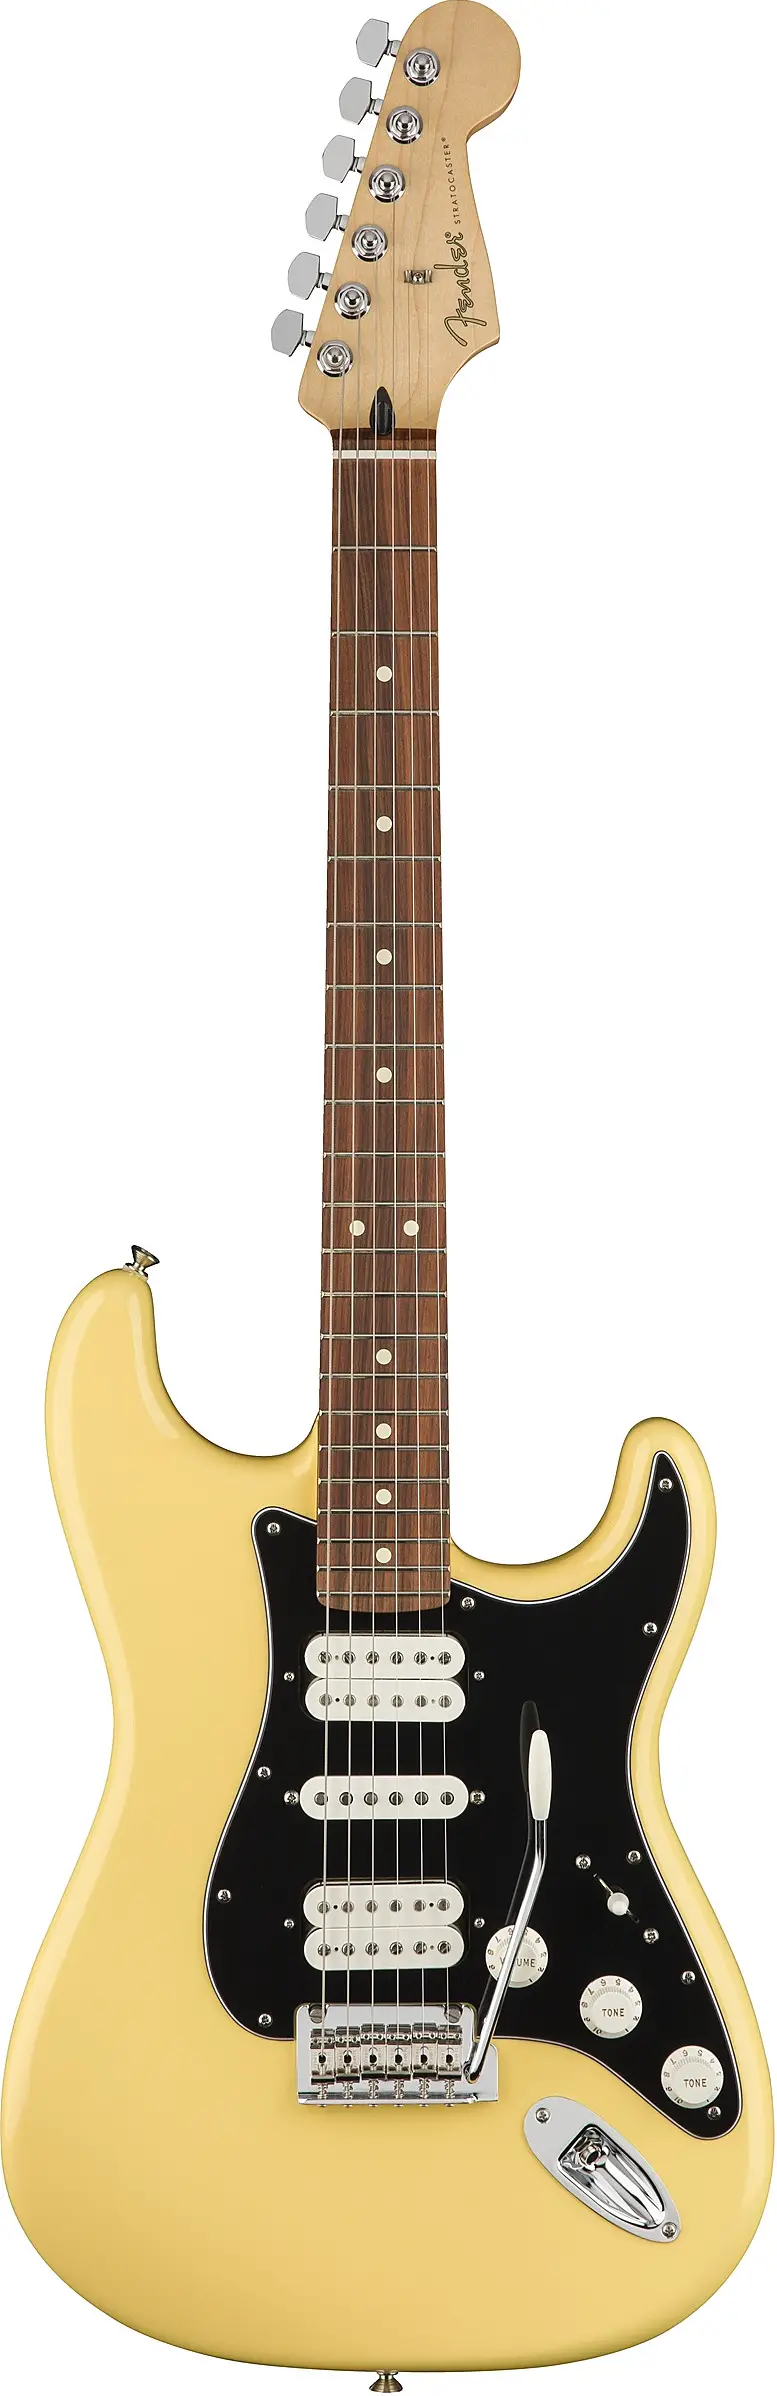 Player Stratocaster� HSH by Fender